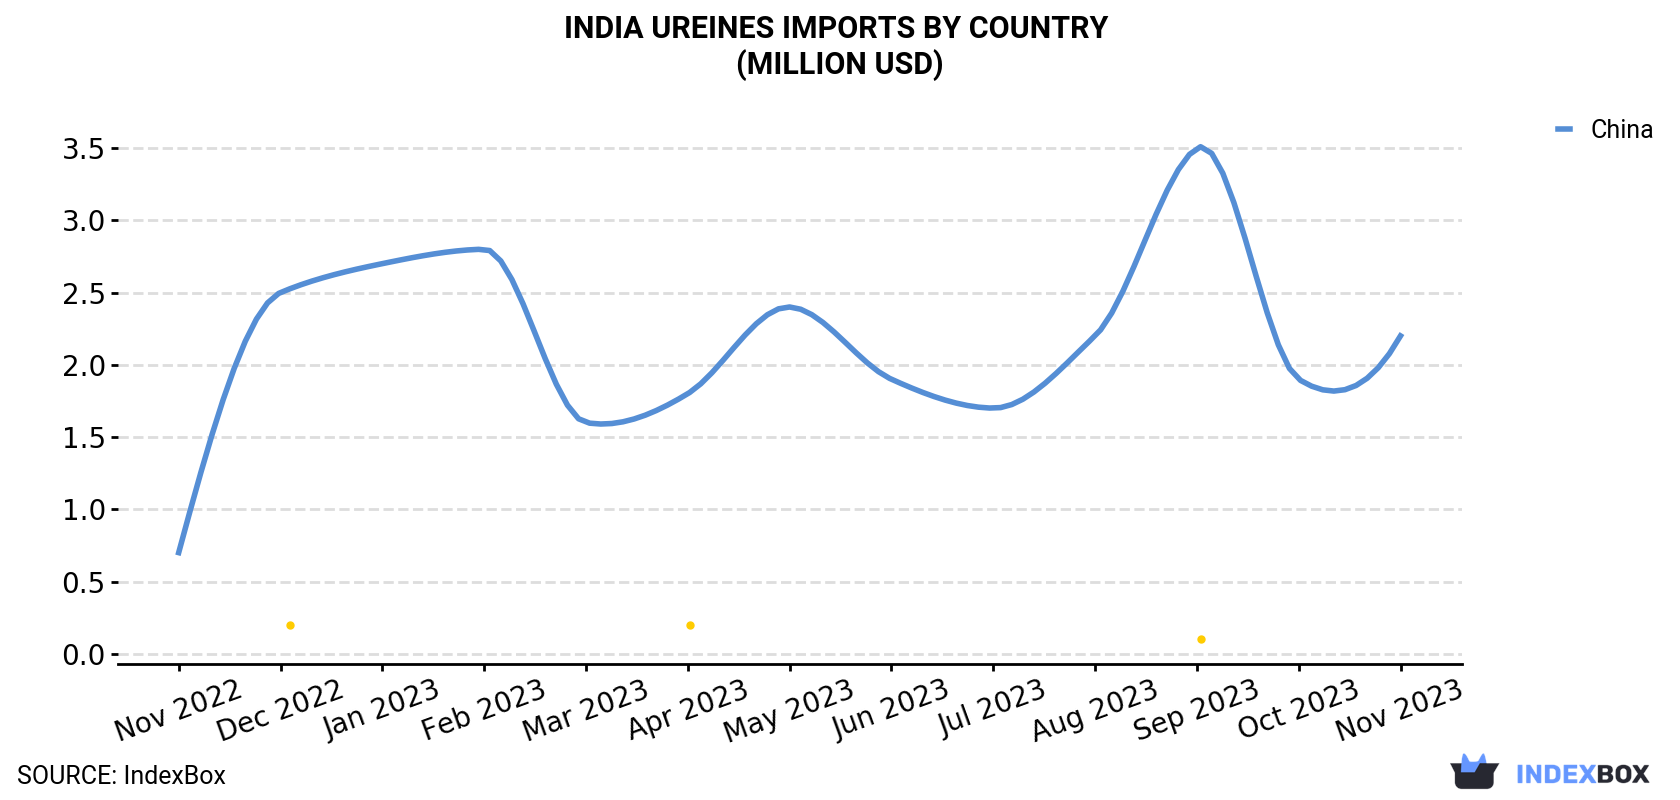 India Ureines Imports By Country (Million USD)